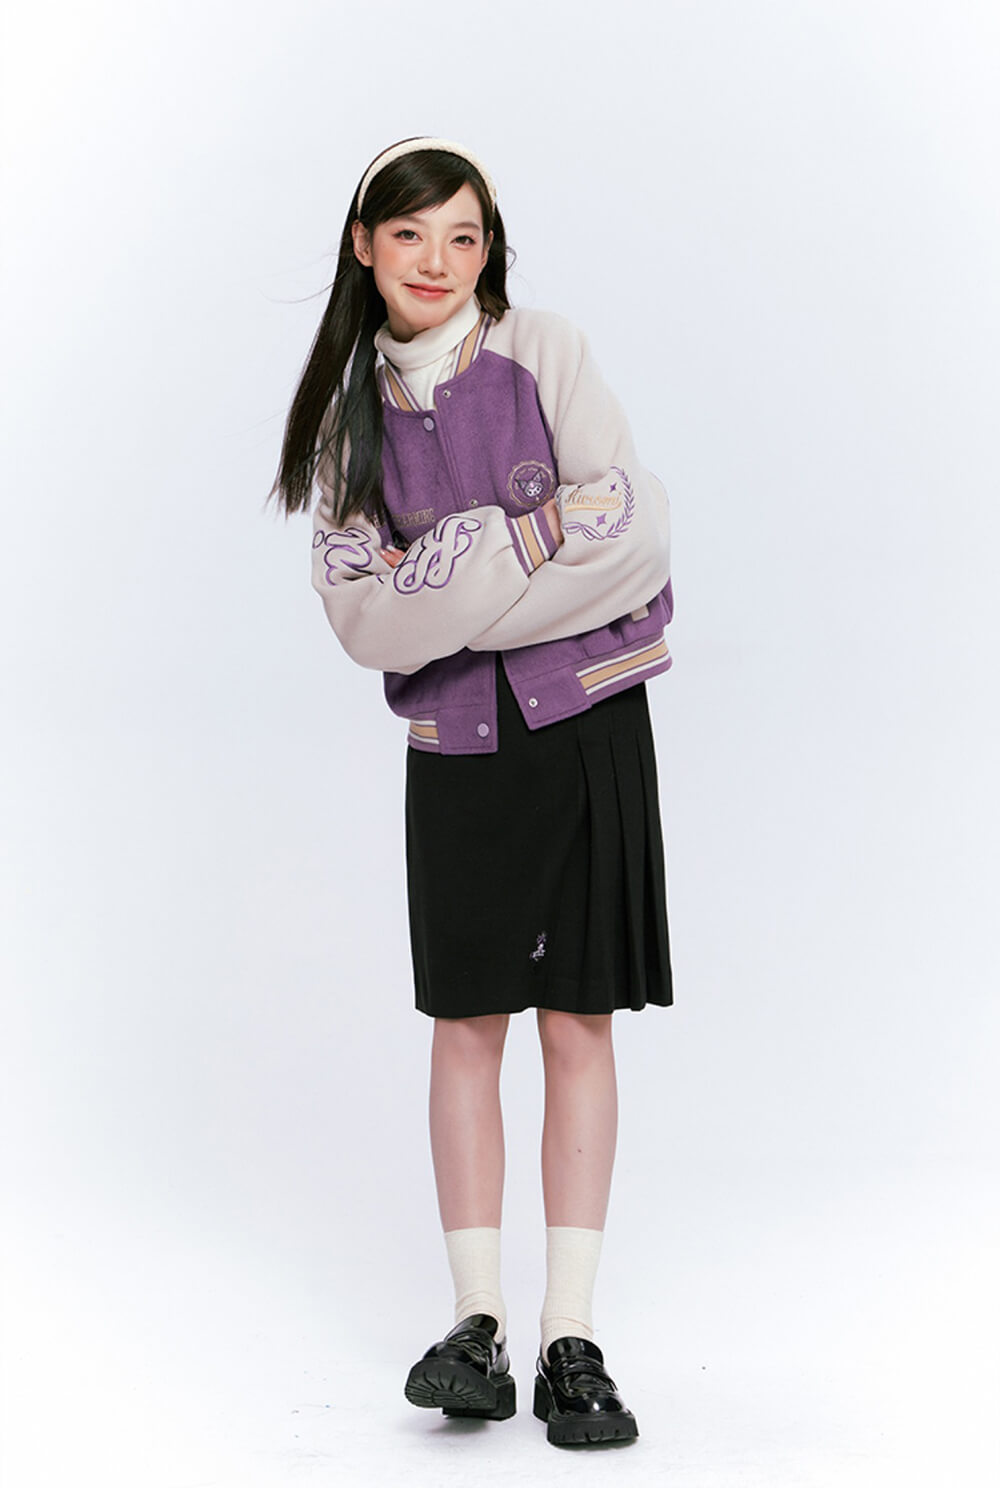 japanese-preppy-style-girl-outfit-styled-by-kuromi-purple-varsity-jacket-and-kuromi-black-pleated-skirt